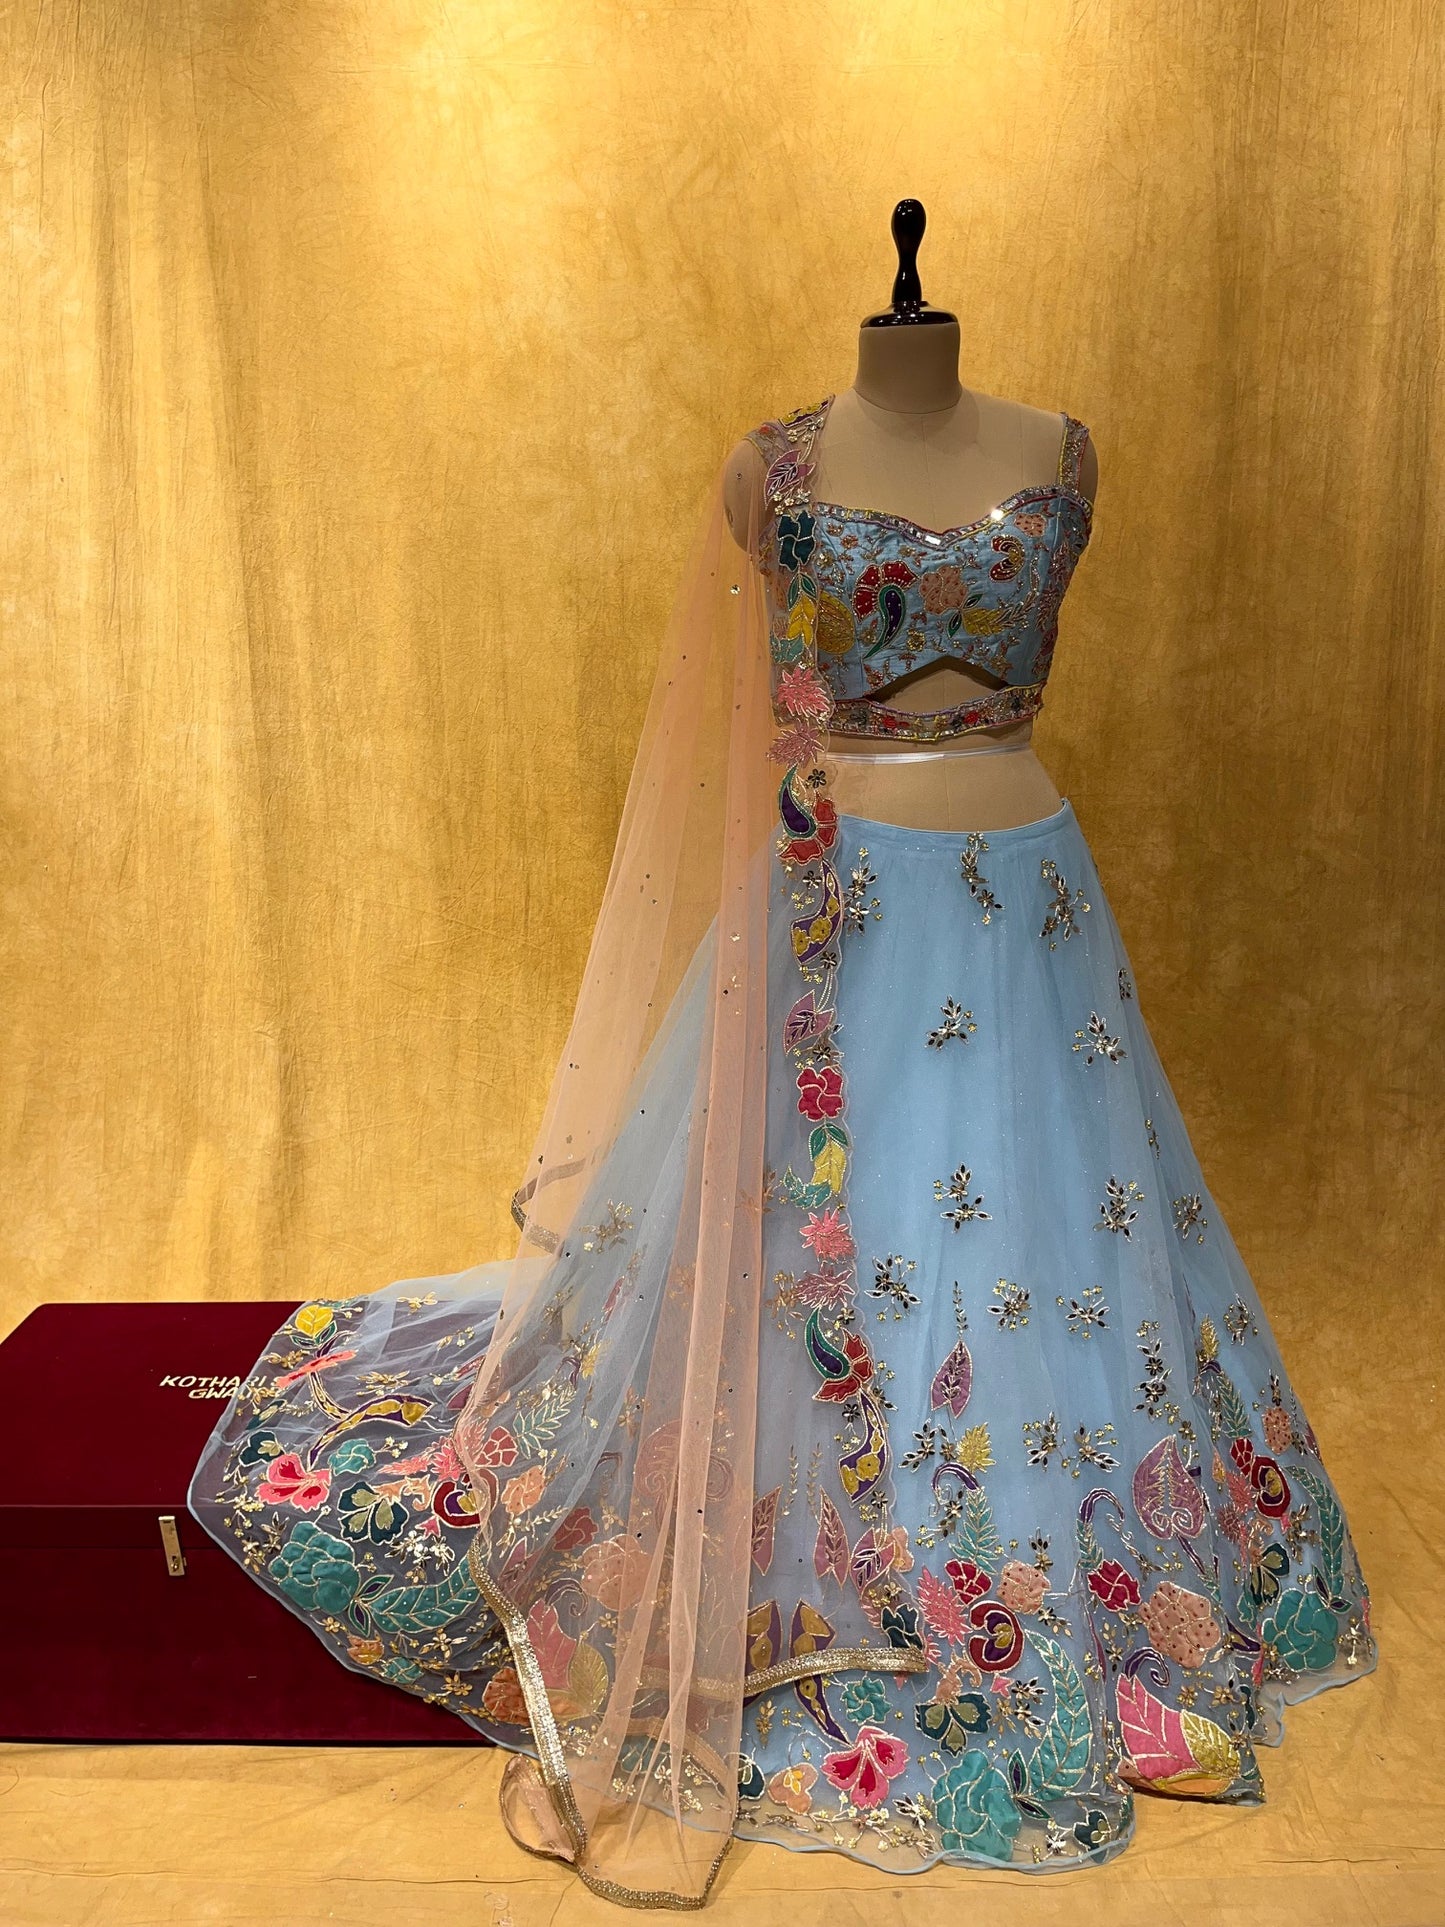 (DELIVERY IN 20-25 DAYS) BRIDESMAIDS READYMADE POWDER BLUE NET LEHENGA WITH CONTRAST DUPATTA & CROP TOP BLOUSE EMBELLISHED WITH APPLIQUE & CUTDANA WORK